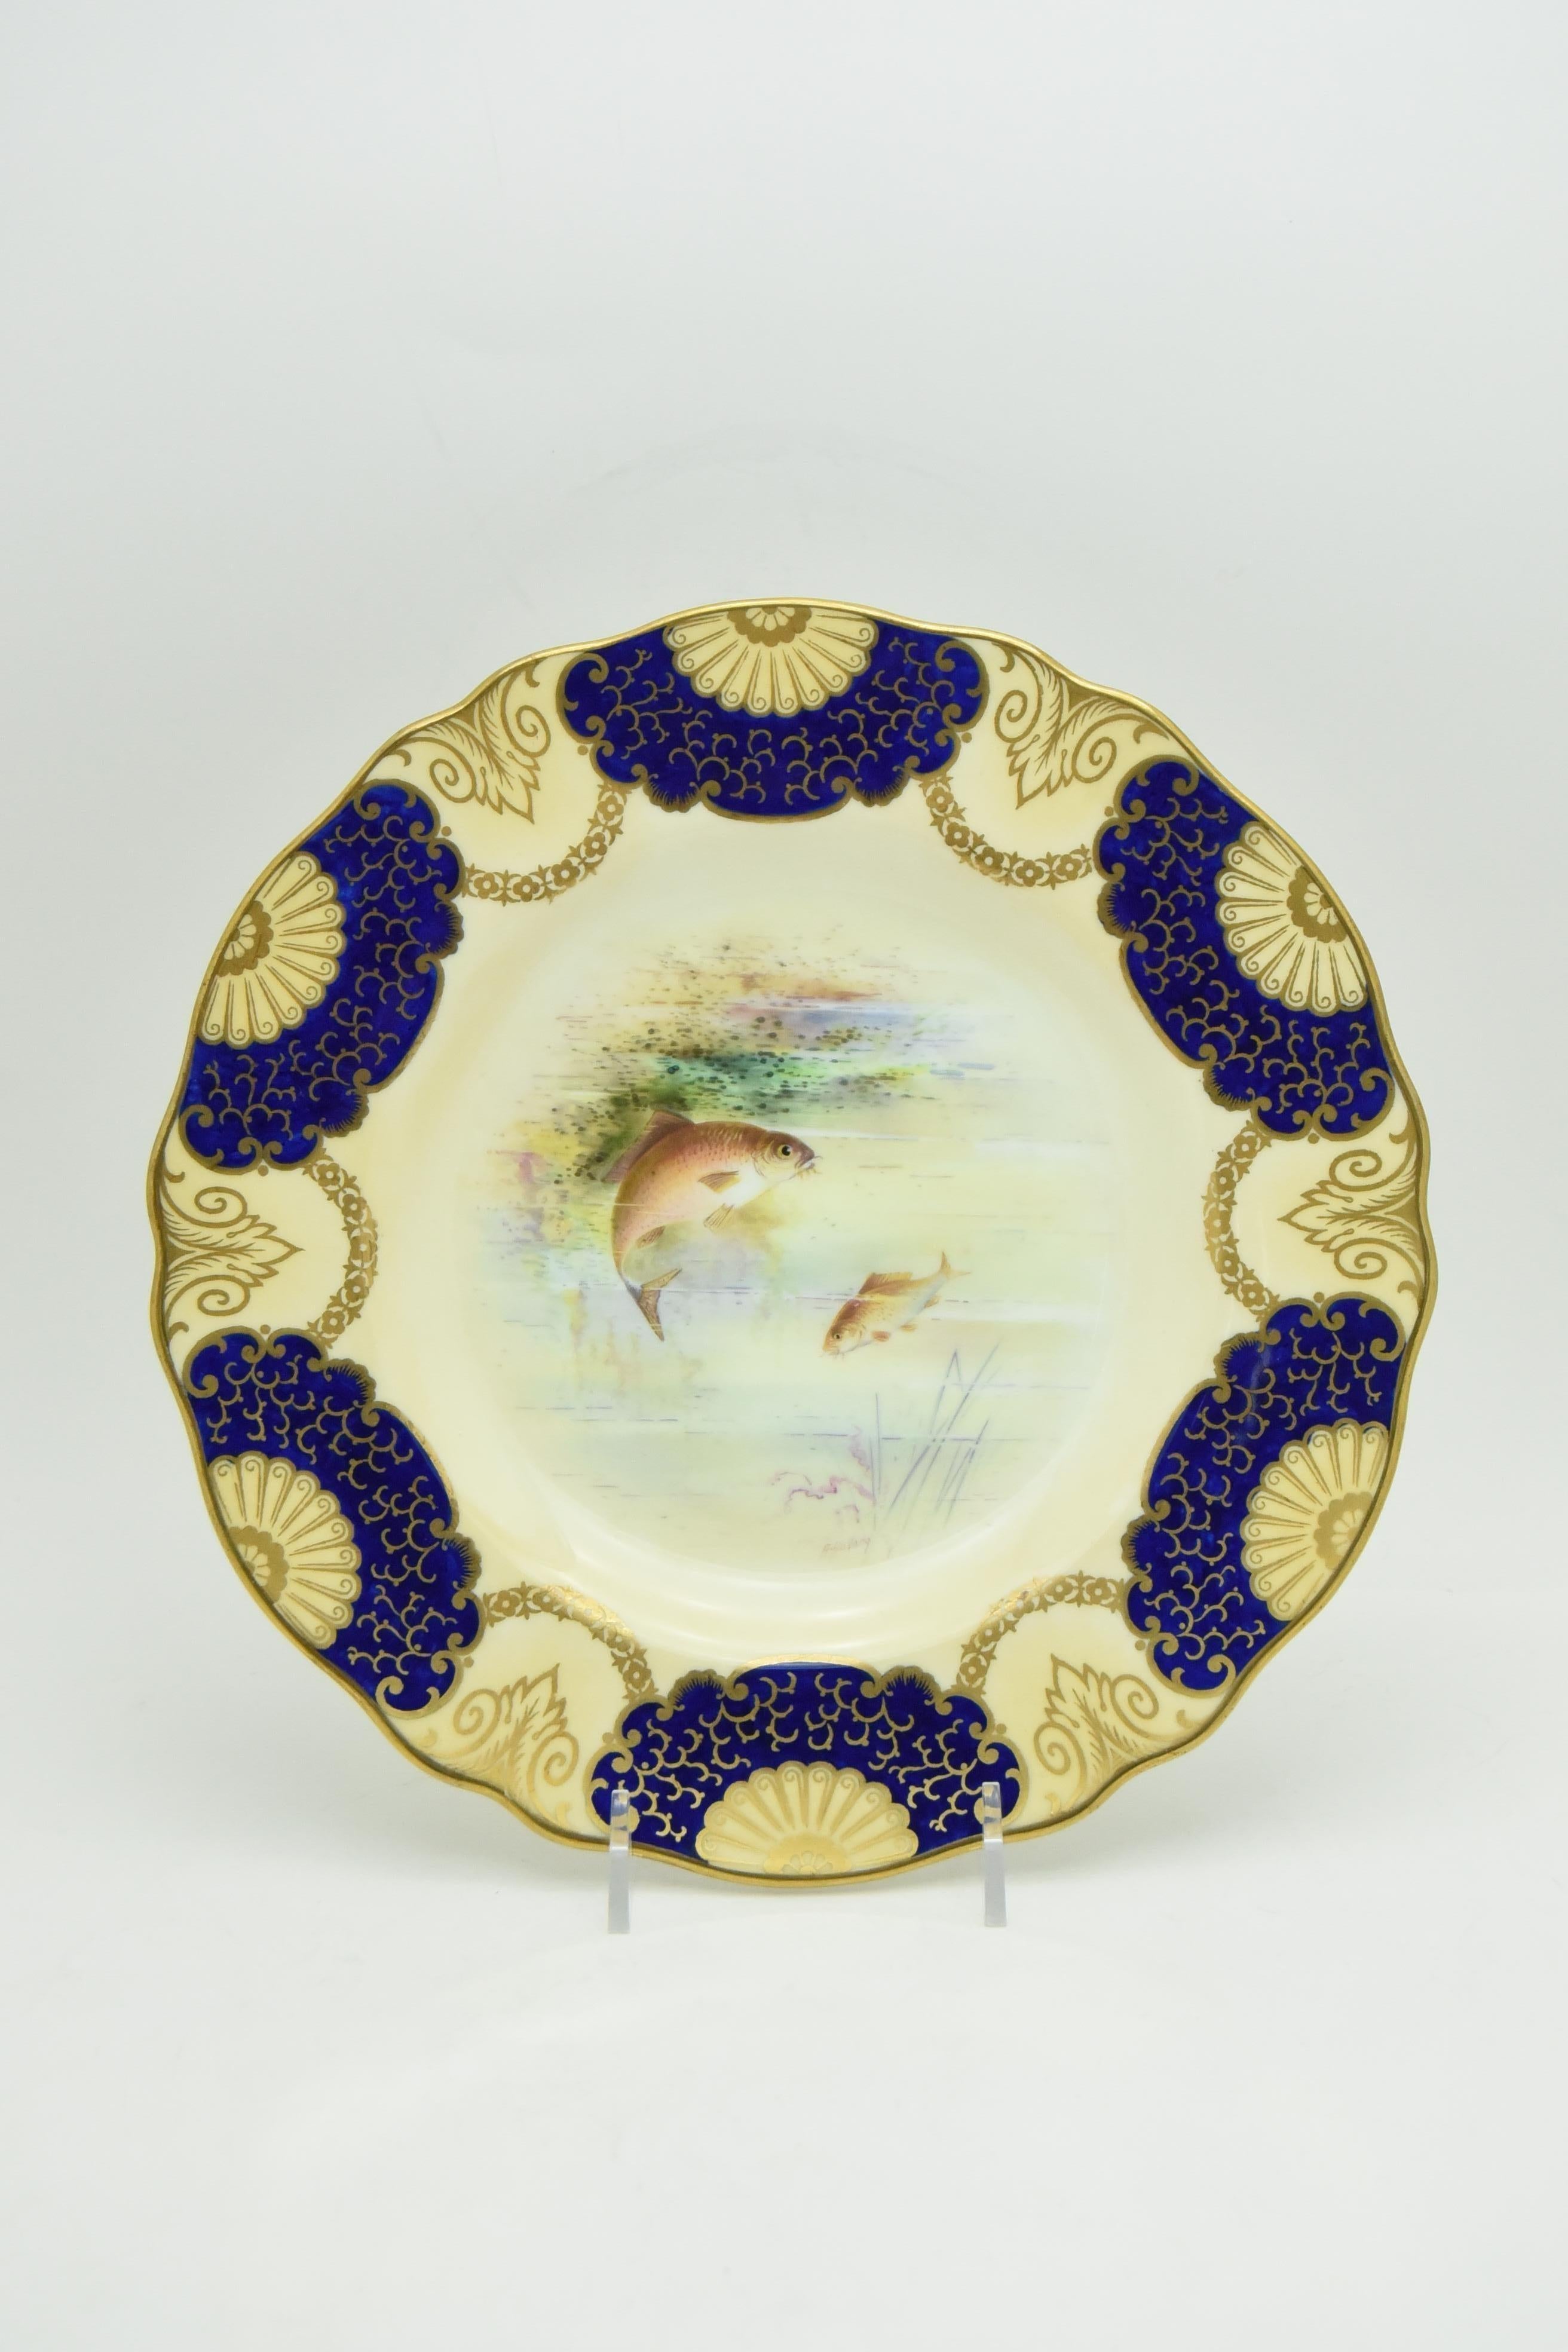 This is a large set of 16 hand painted and artist signed A. Holland, one of Wedgwood's famous and iconic artists. These fish plates are decorated with an unusual border incorporating cobalt blue with pale ivory/caramel and highlighted with a